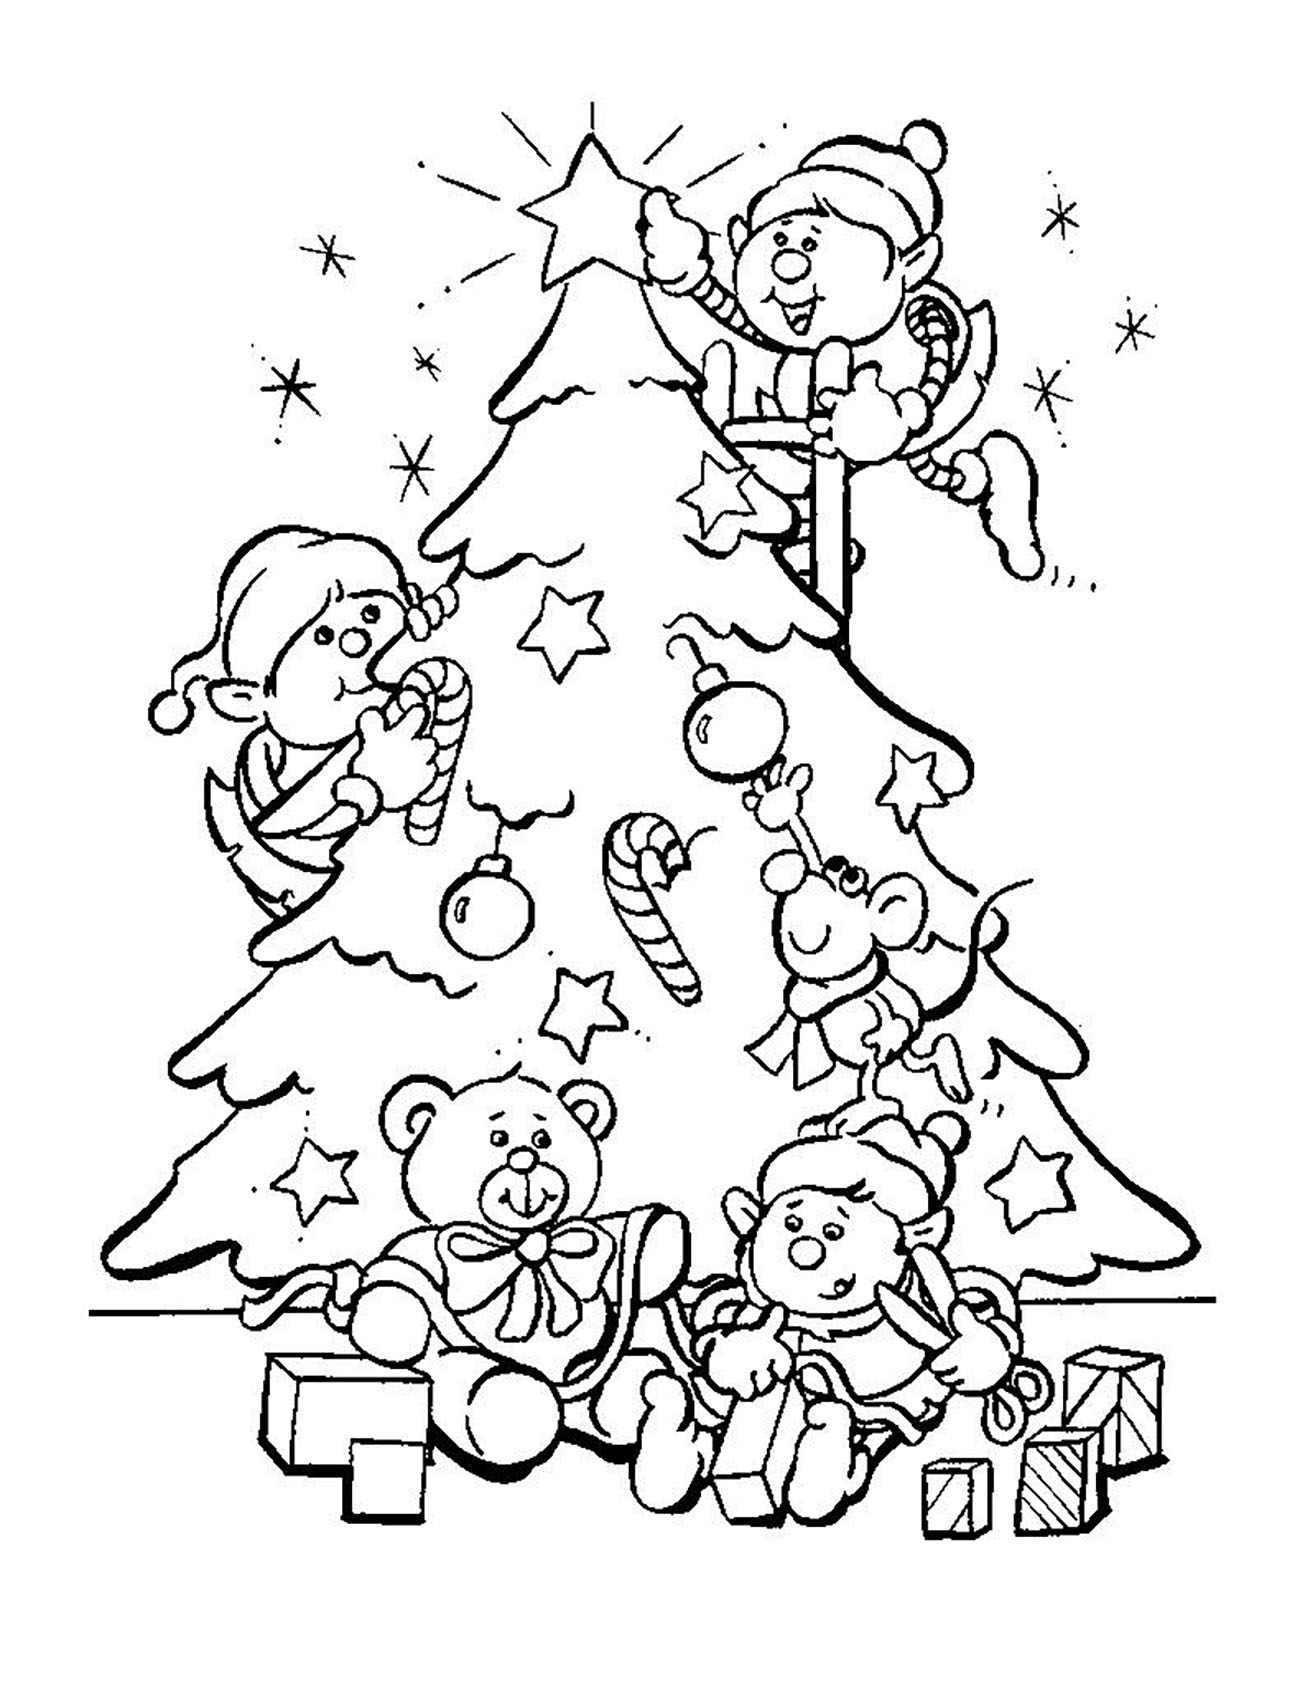 Christmas tree with elves - Christmas Coloring pages for kids to print